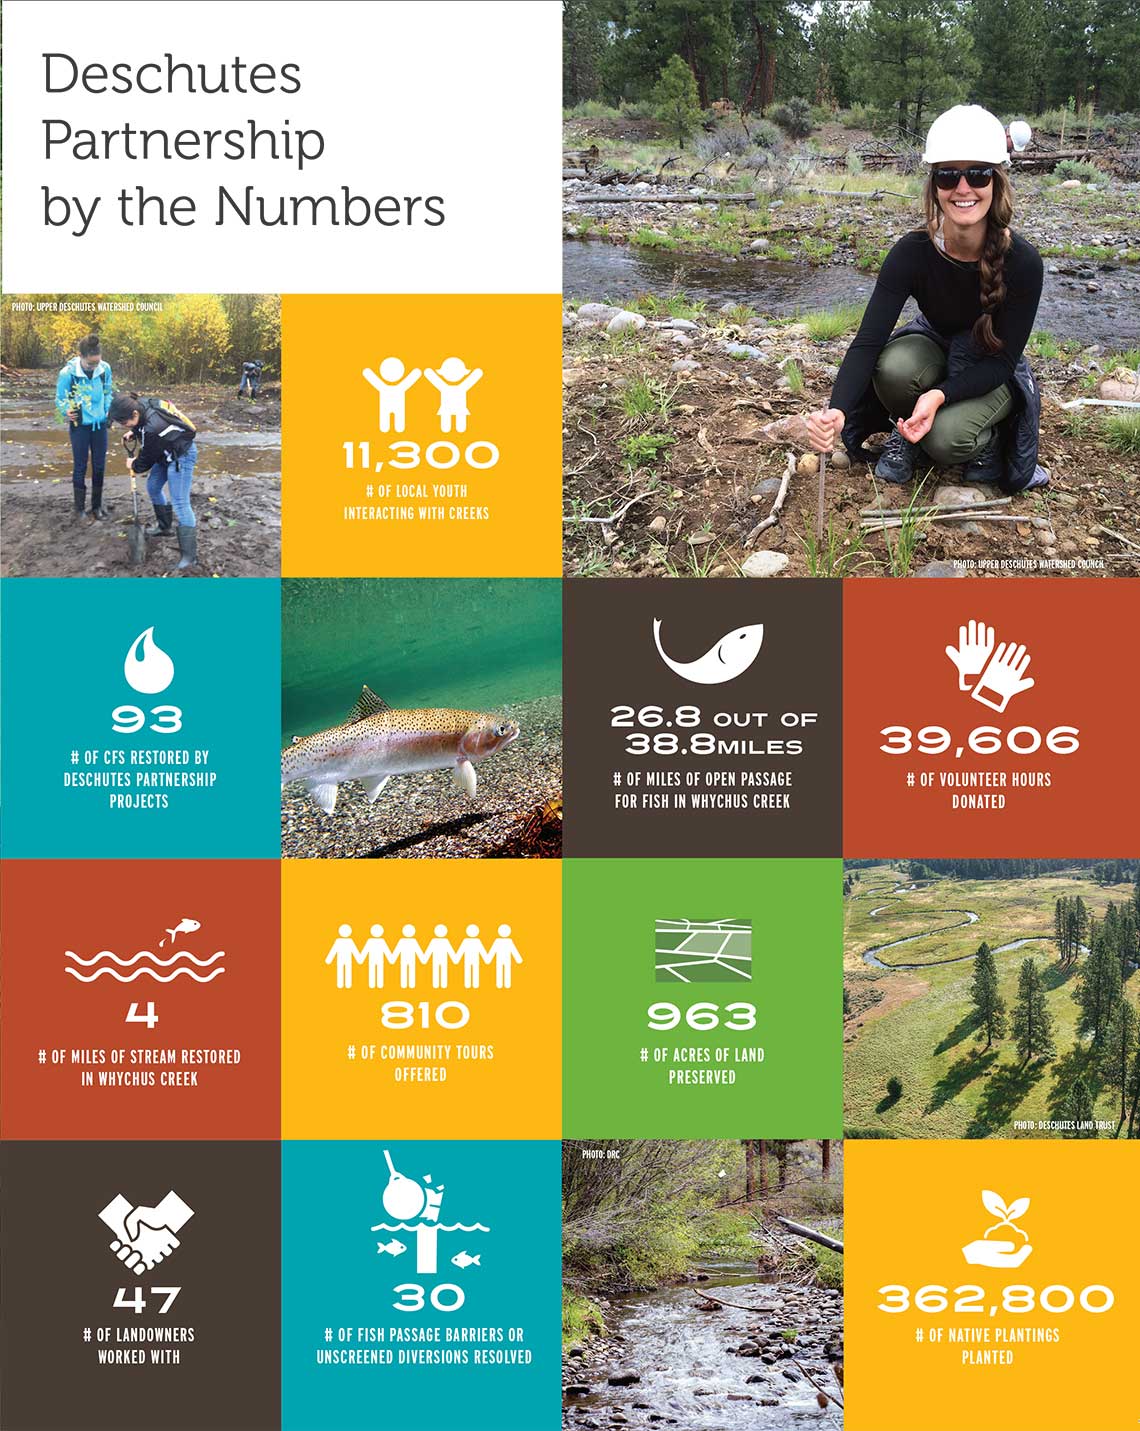 Deschutes-Partnership-by-the-Numbers.jpg